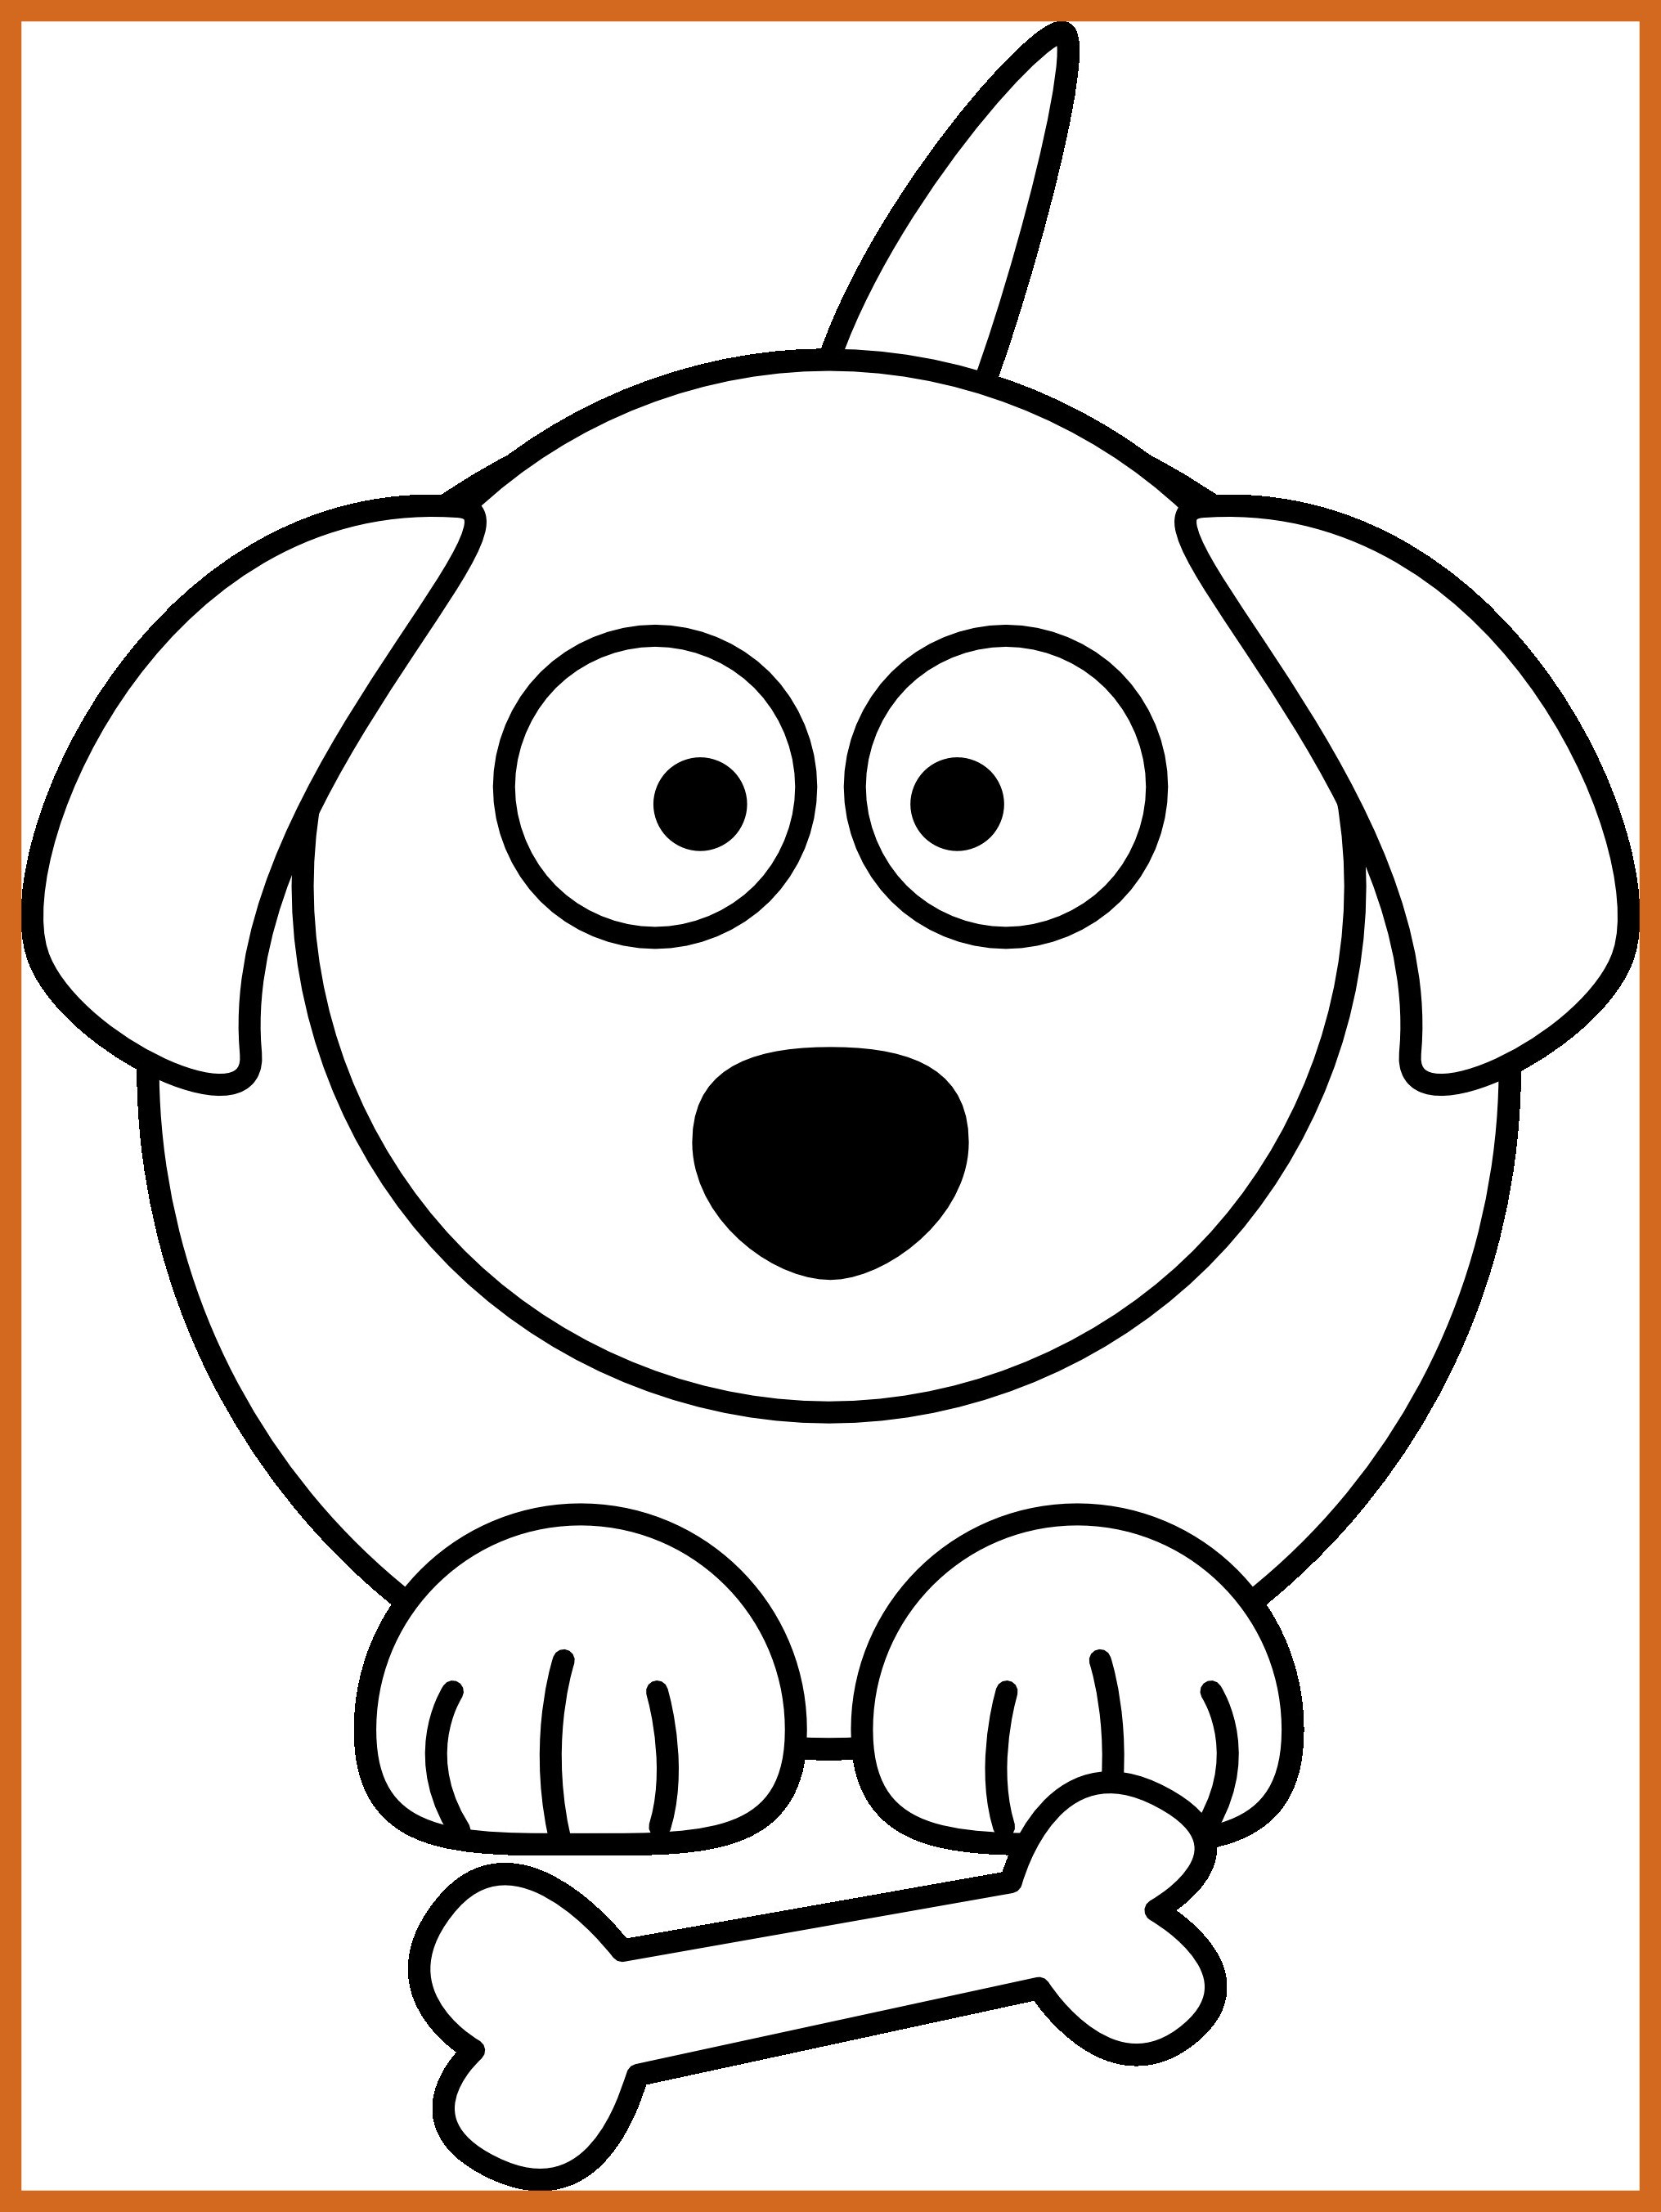 Cute Animals With Big Eyes Coloring Pages at GetColorings ...